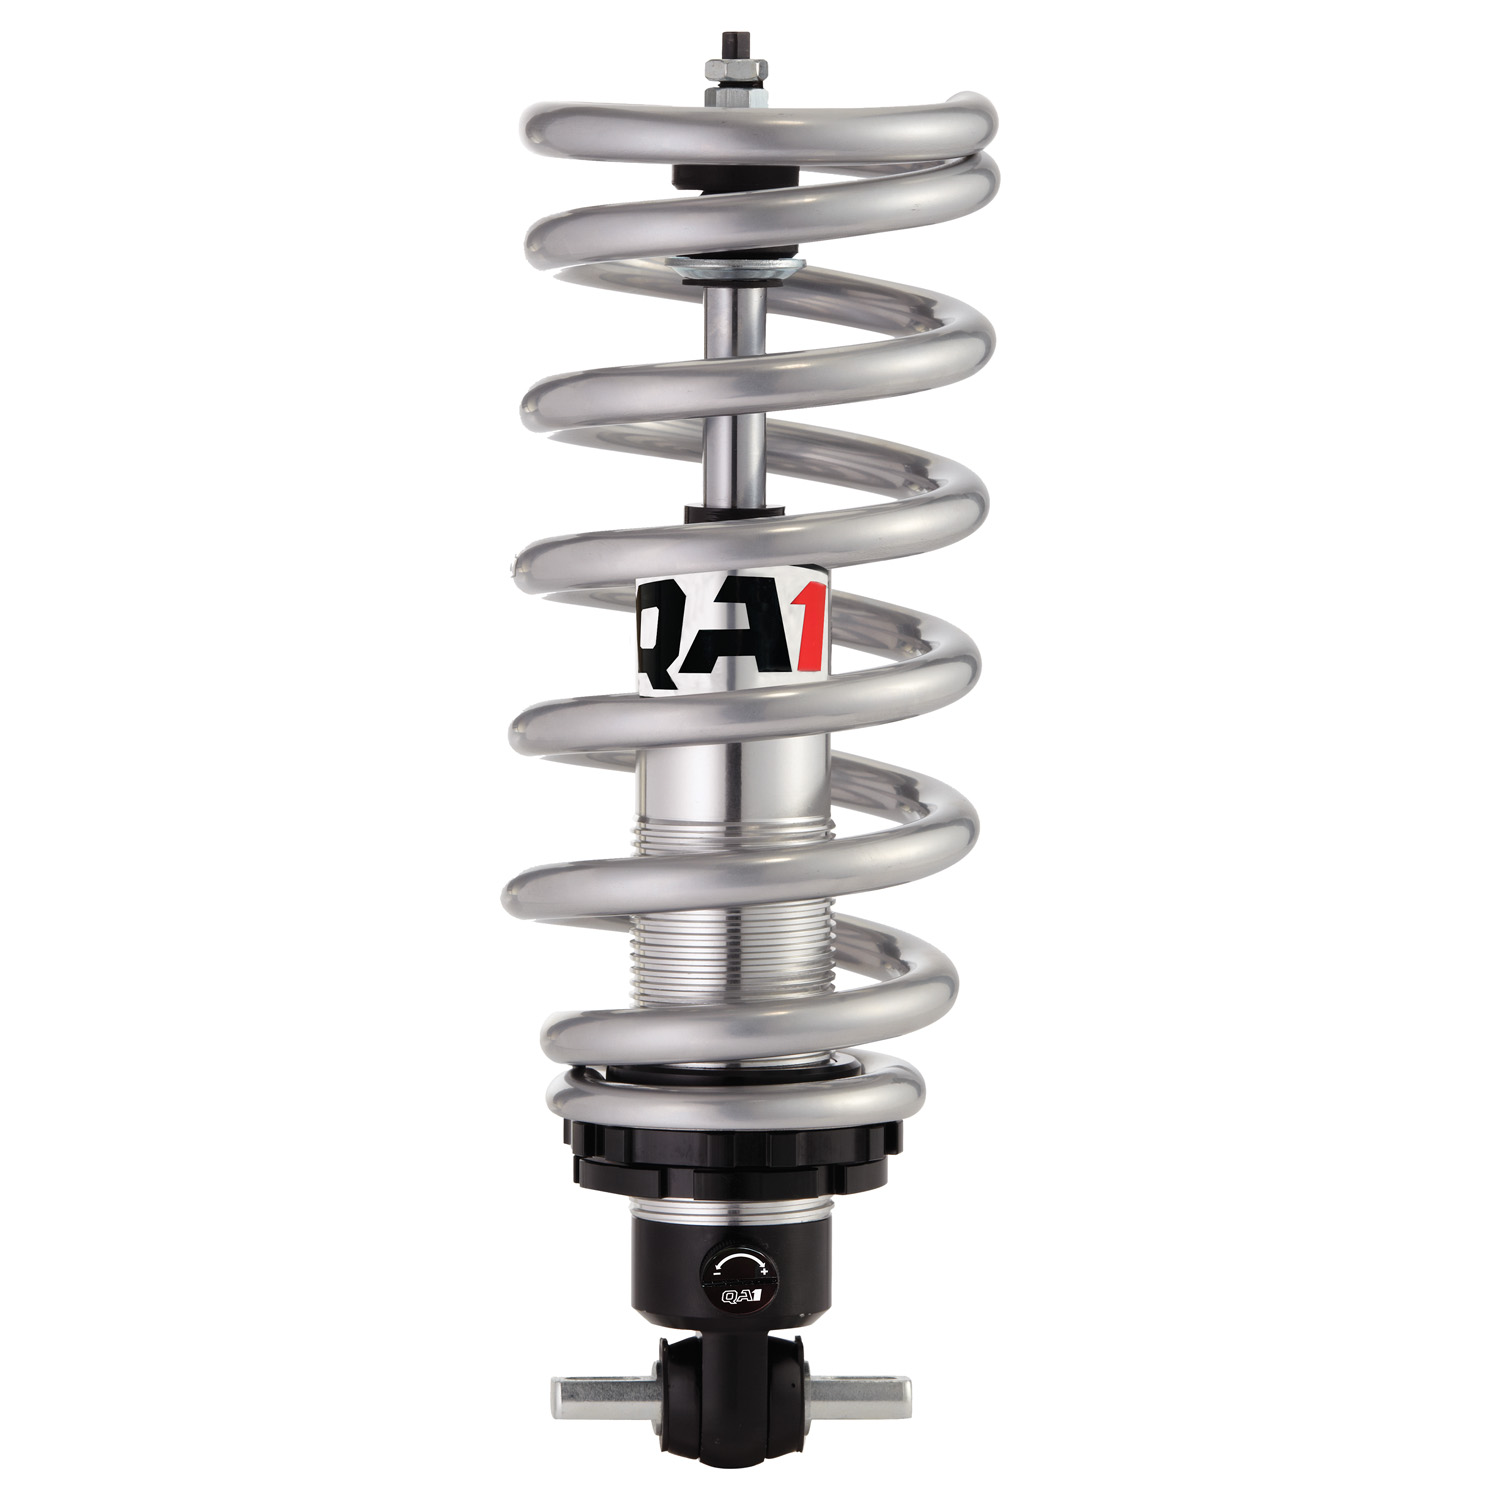 Kit GM Pro Coil Alum S-Adj 10-400 Tapered Pigtail - GS401-10400A